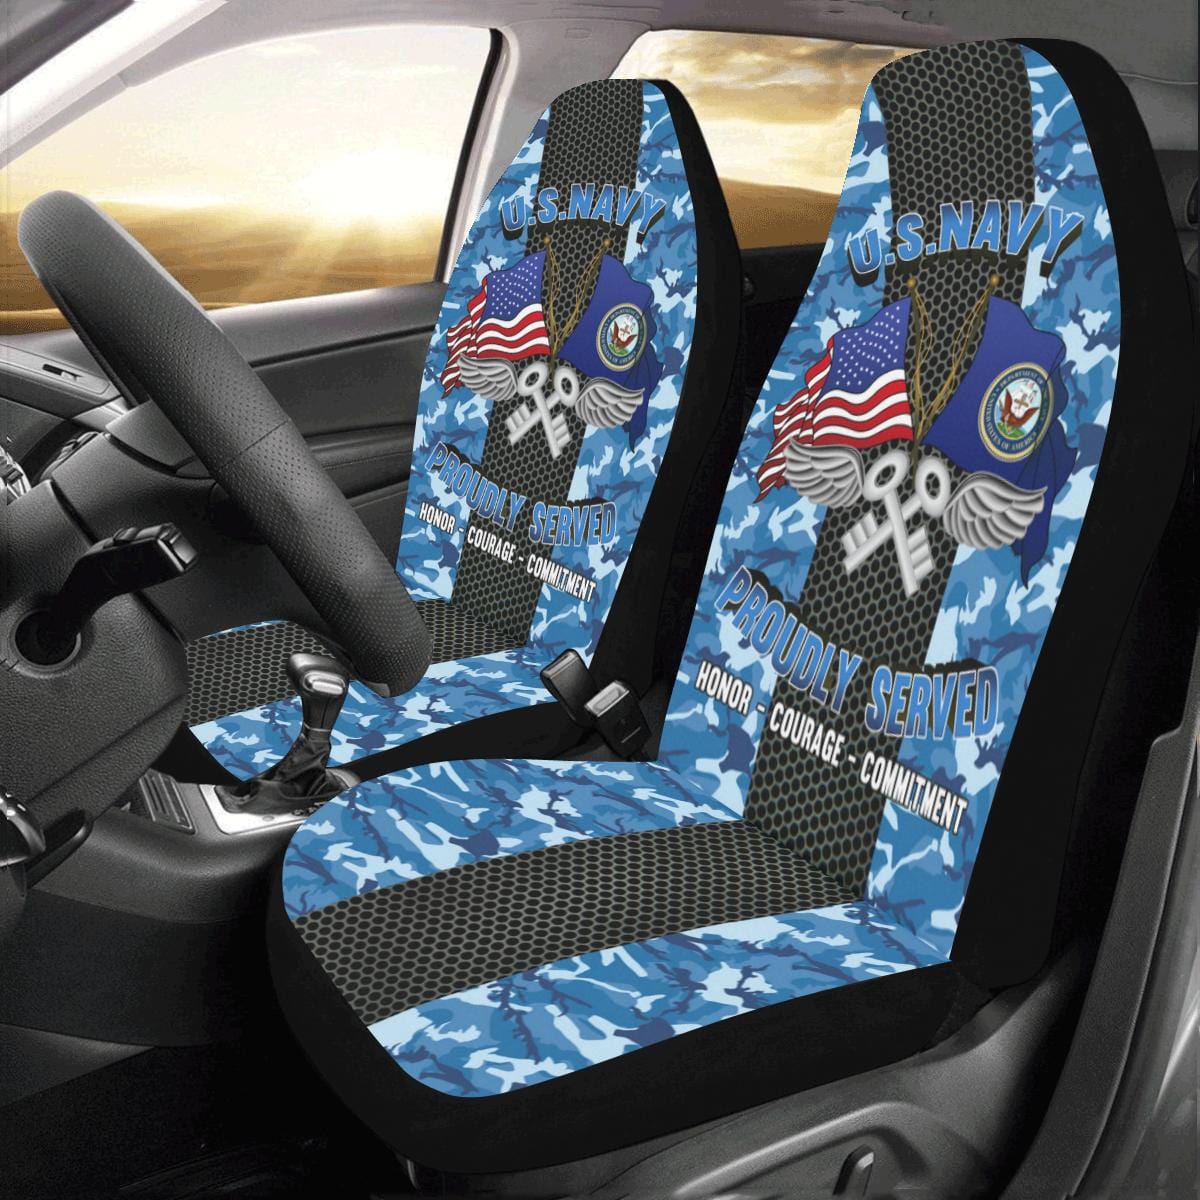 Navy Aviation Storekeeper Navy AK Car Seat Covers (Set of 2)-SeatCovers-Navy-Rate-Veterans Nation